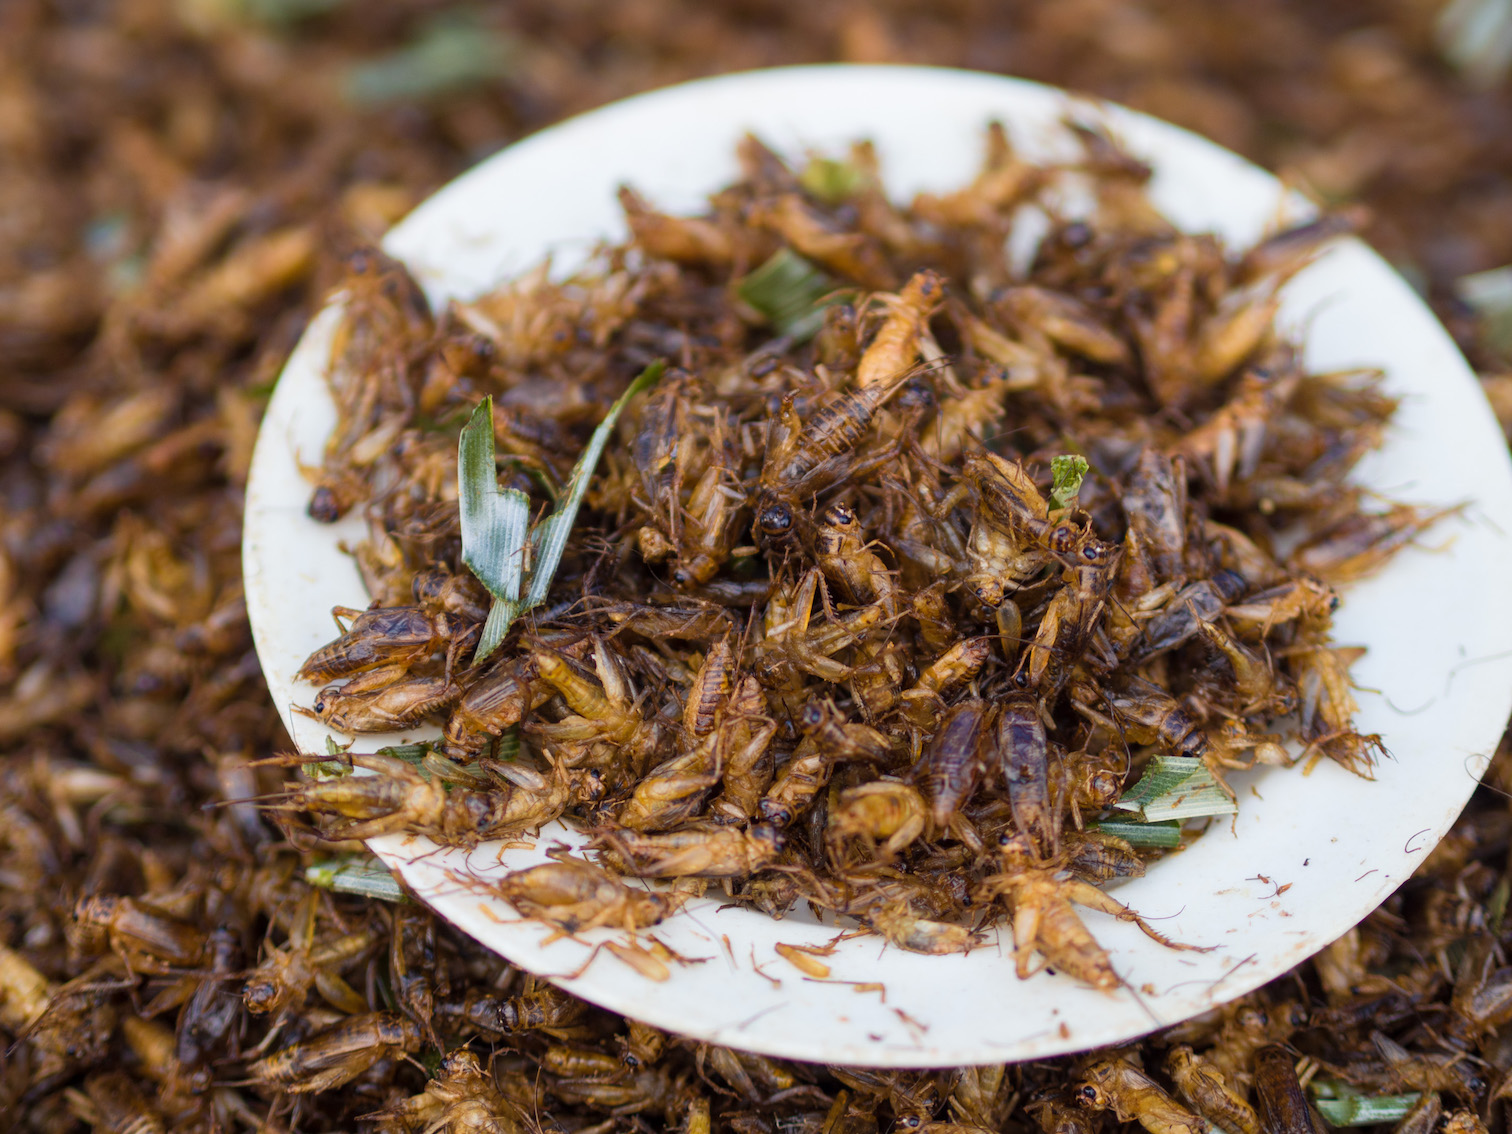 Canadian government spends $8.5 million on insect production facility to force people to eat BUGS